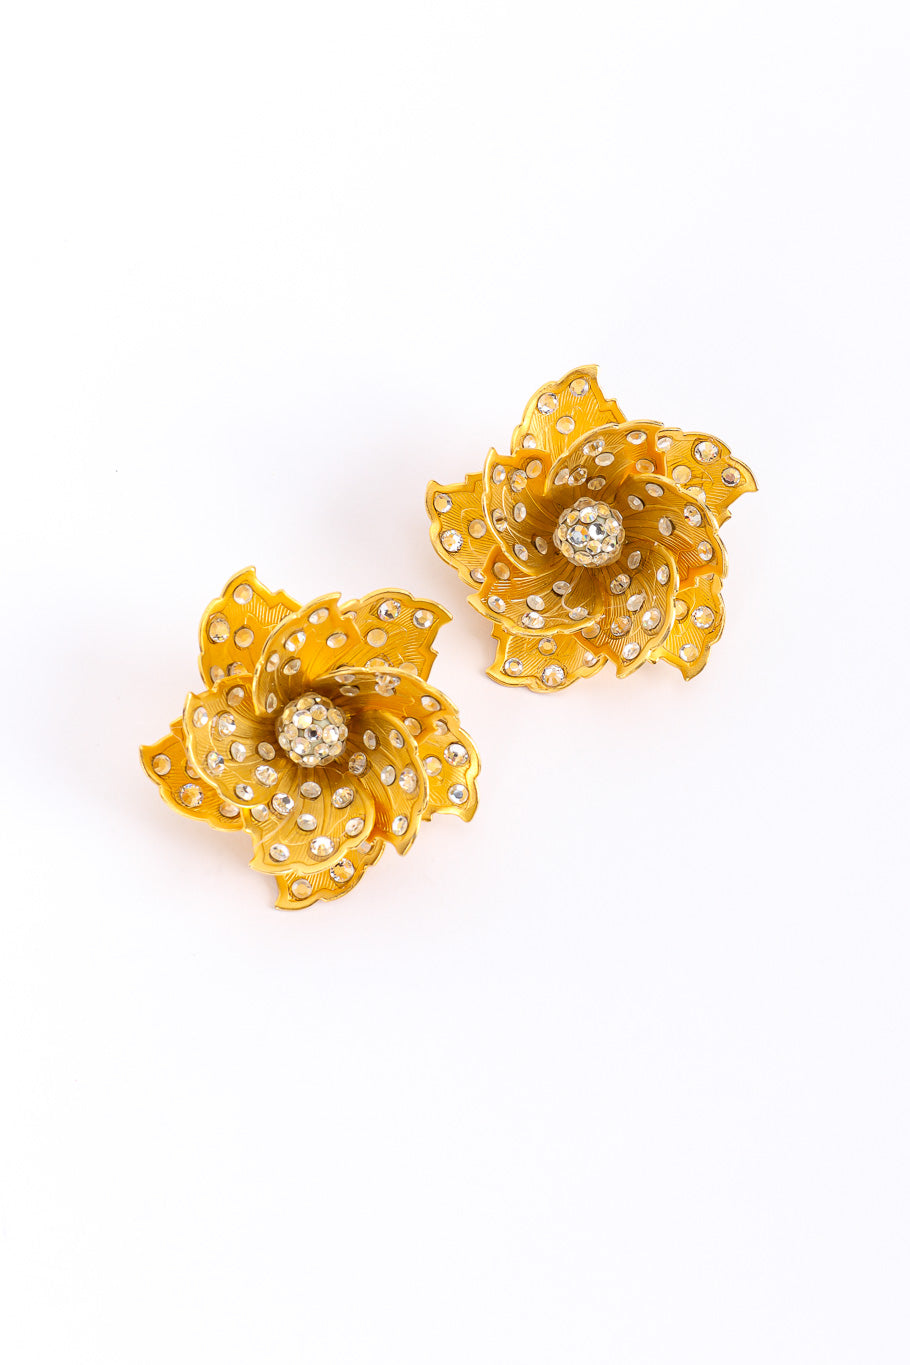 Sculpted flower earrings by James Arpad on white background @recessla